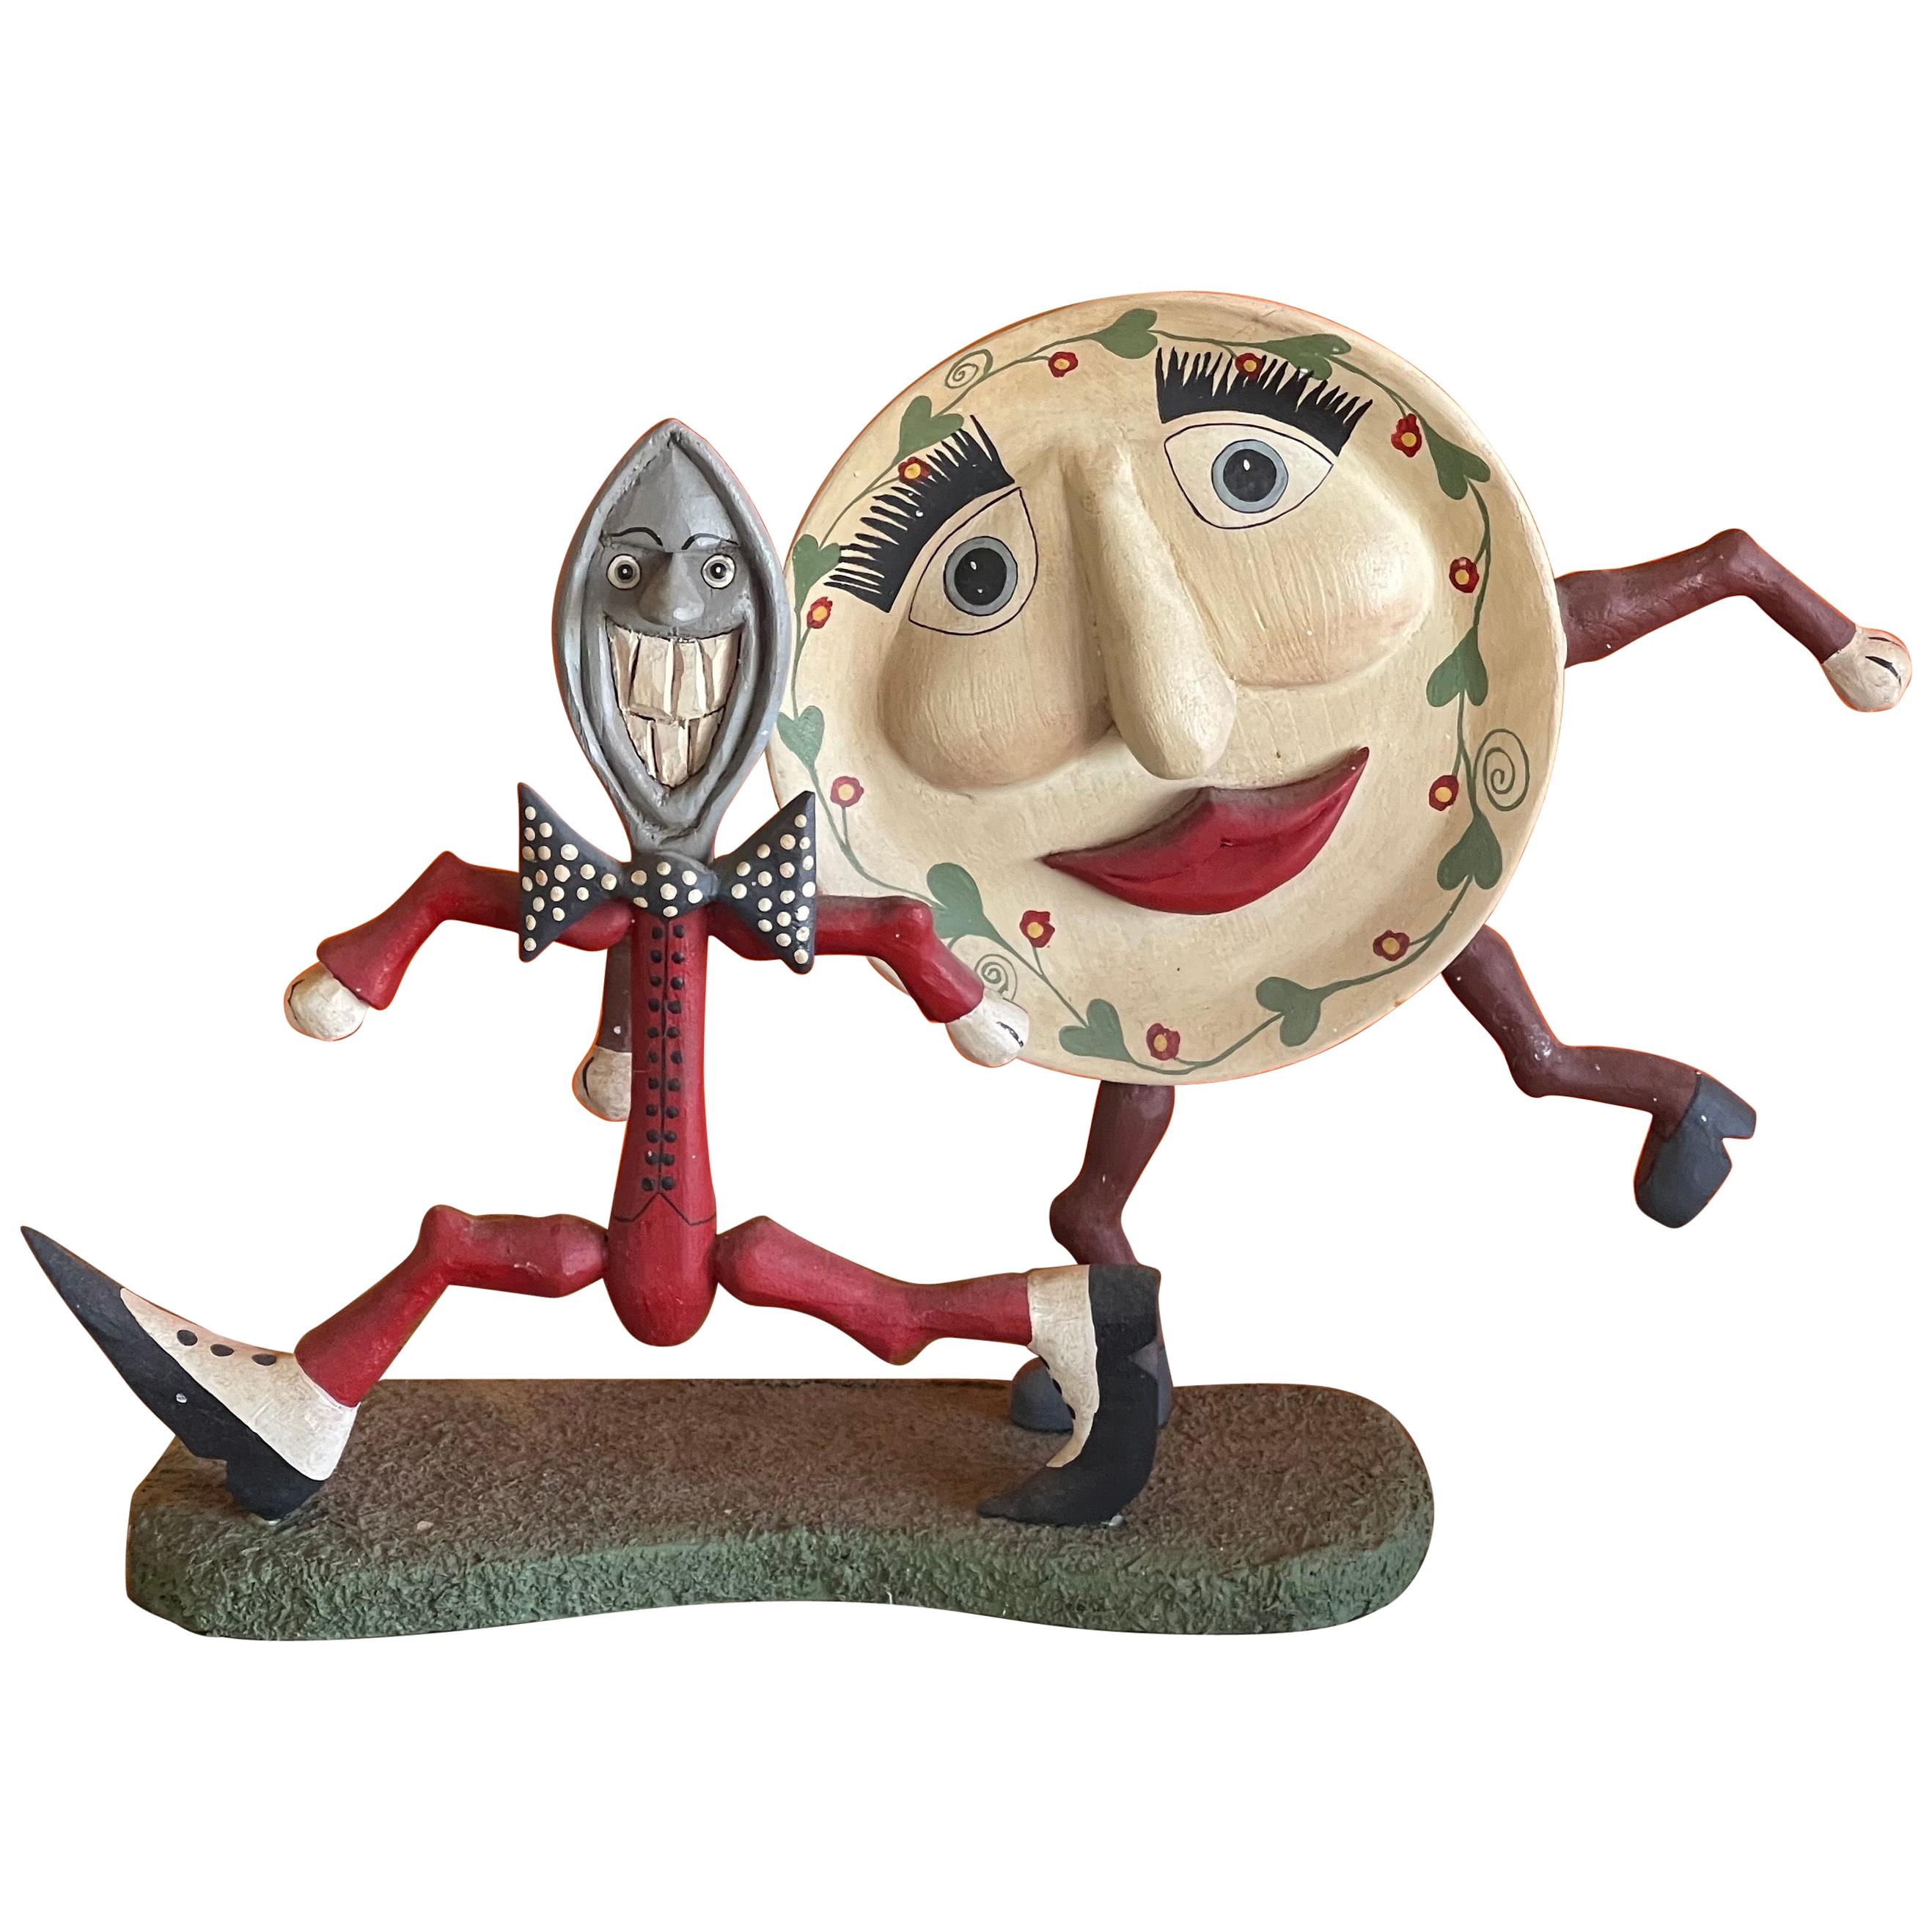 Whimsical Folk Art Sculpture "Dish Ran Away With the Spoon"